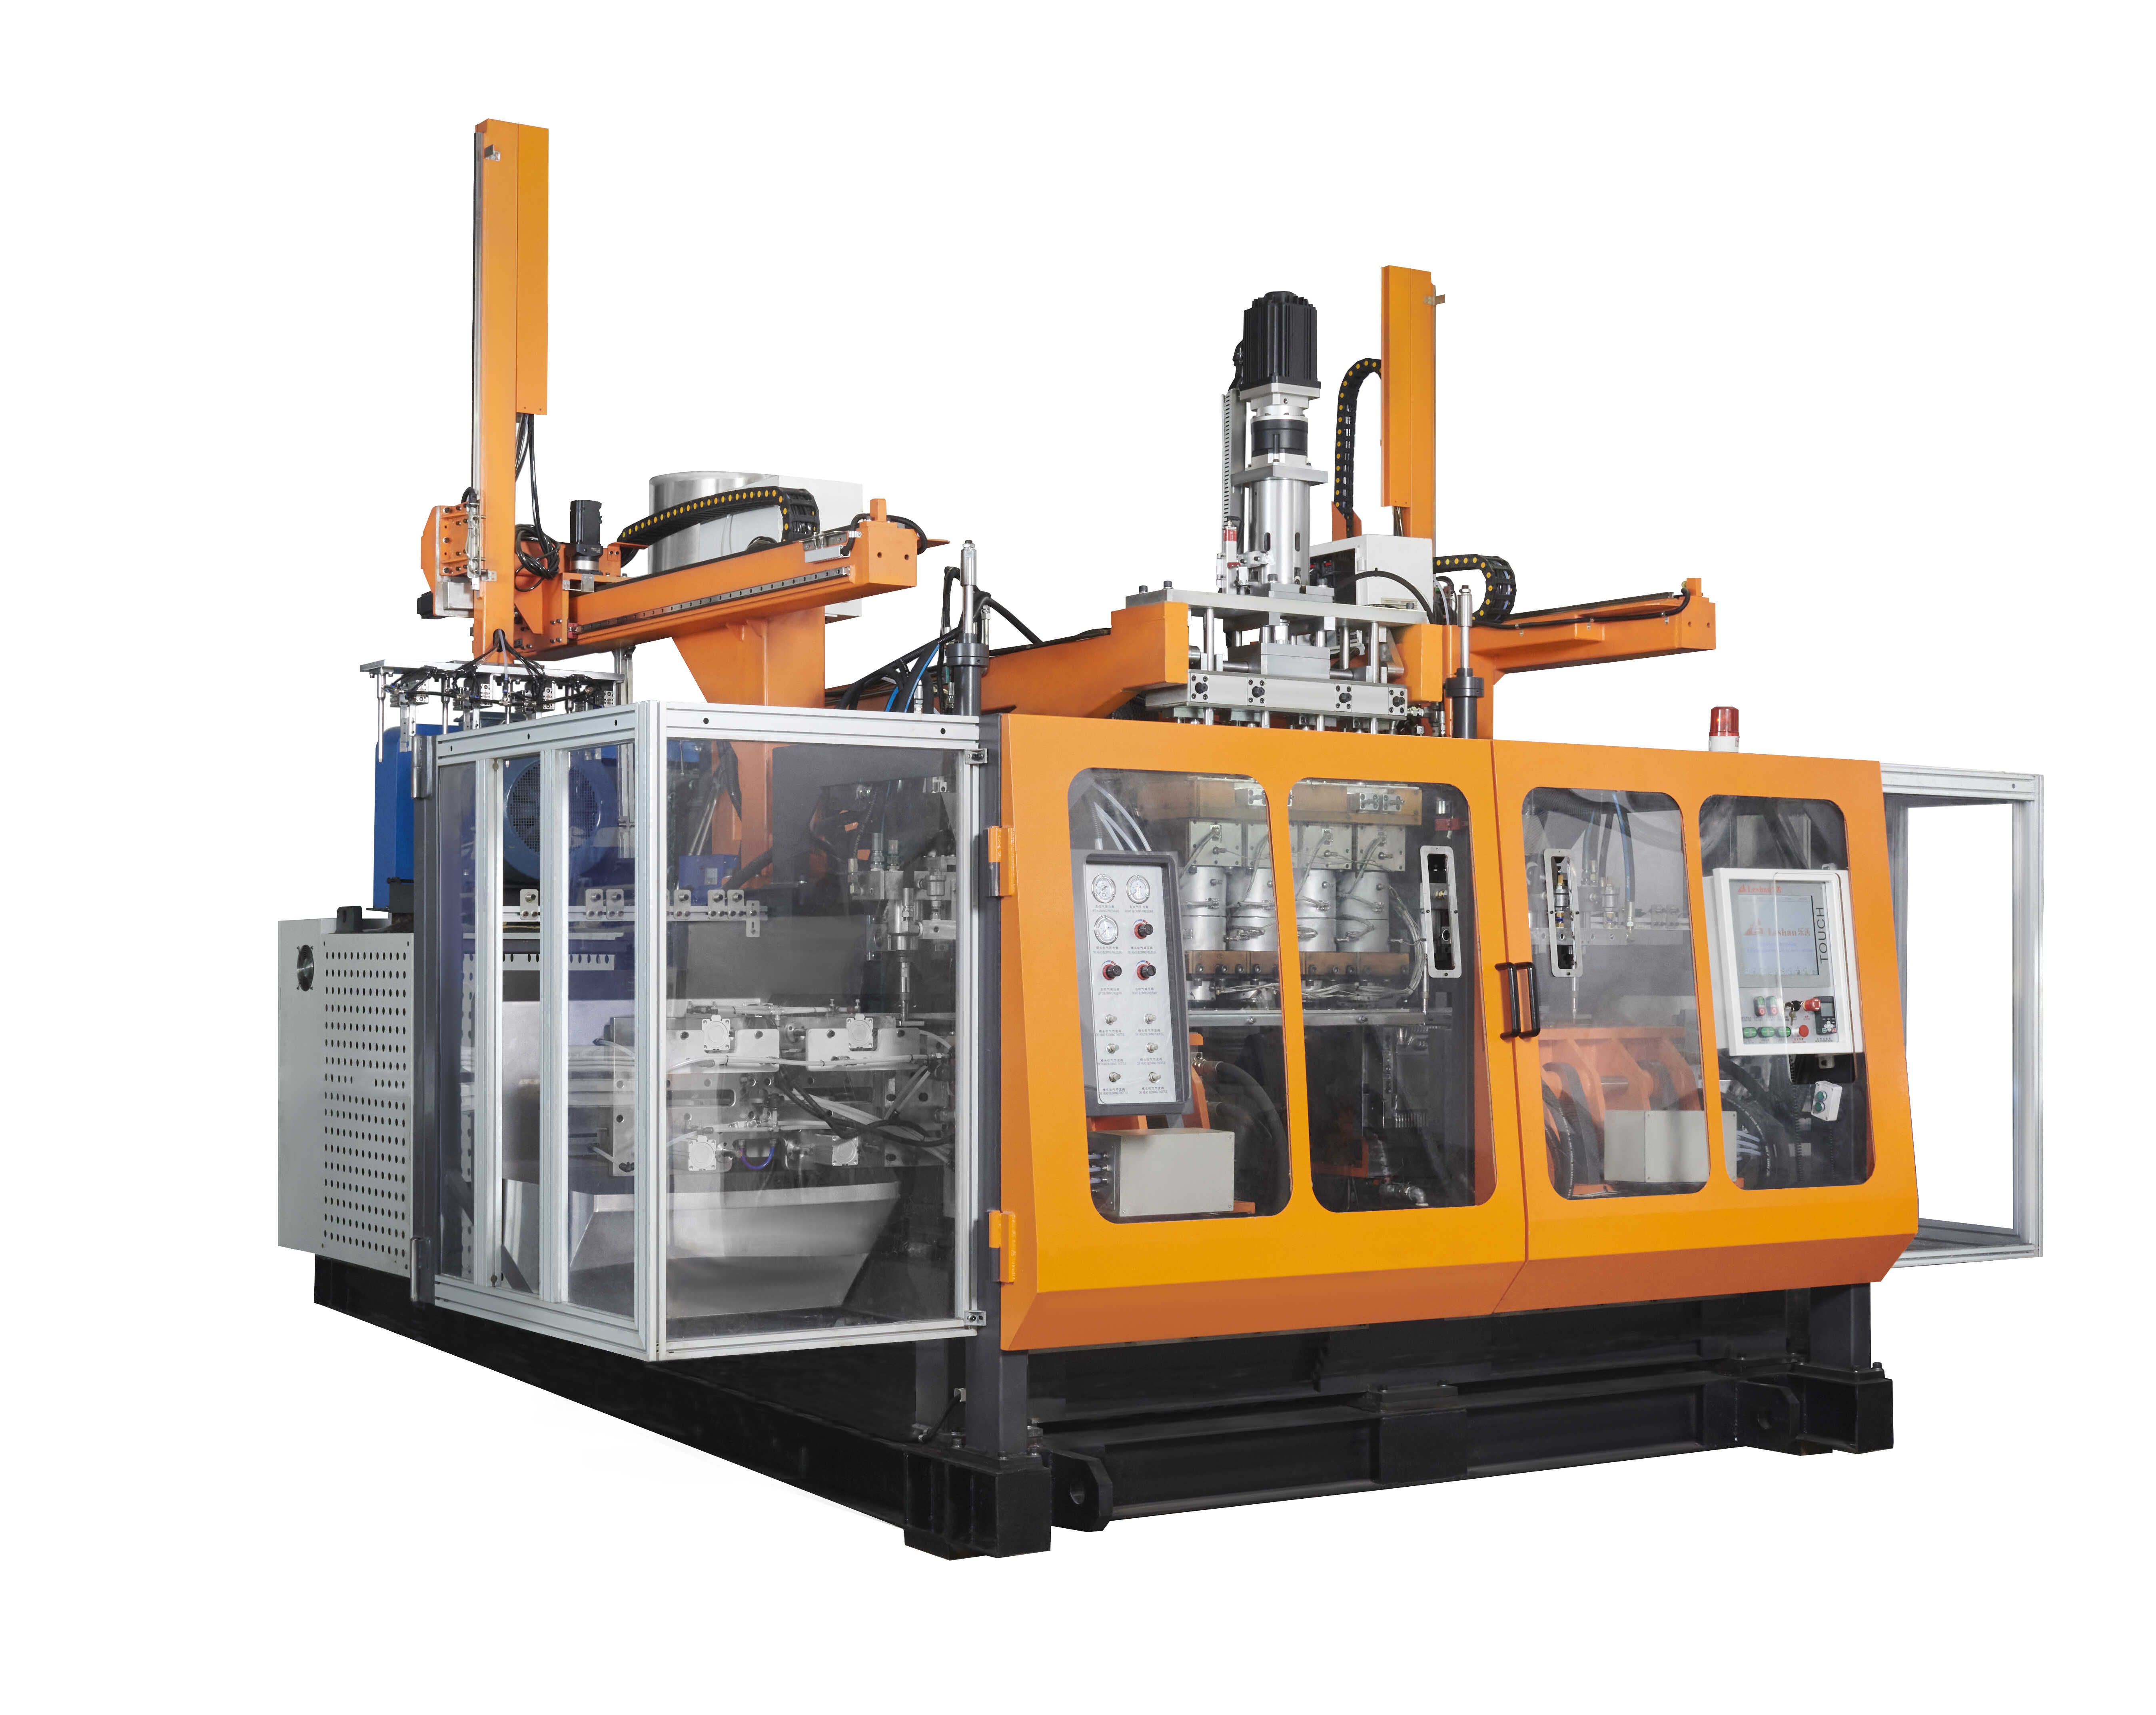 What is the output of electric blow molding machine?